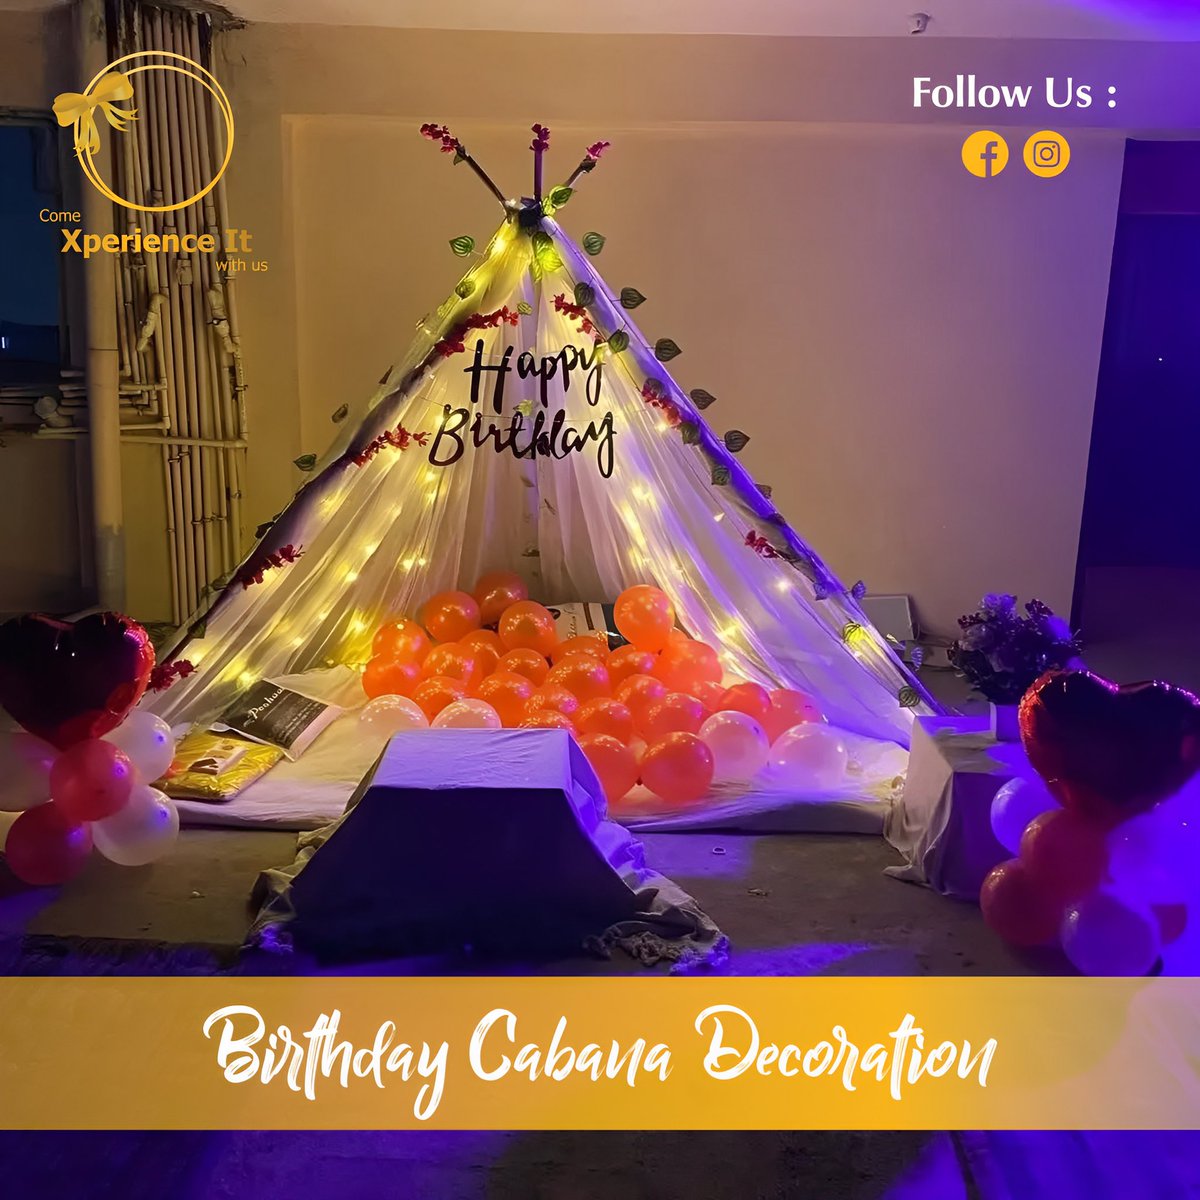 Looking for the best Birthday Cabana Decorations🎈 at home or outside? Book the best cabana decoration in your town '@XperienceIt' within your budget. #eventcompanylucknow #birthday #love #happybirthday #party #Hyderabad #cabanabirthdaydecoration #celebration #hyderabadbirthday